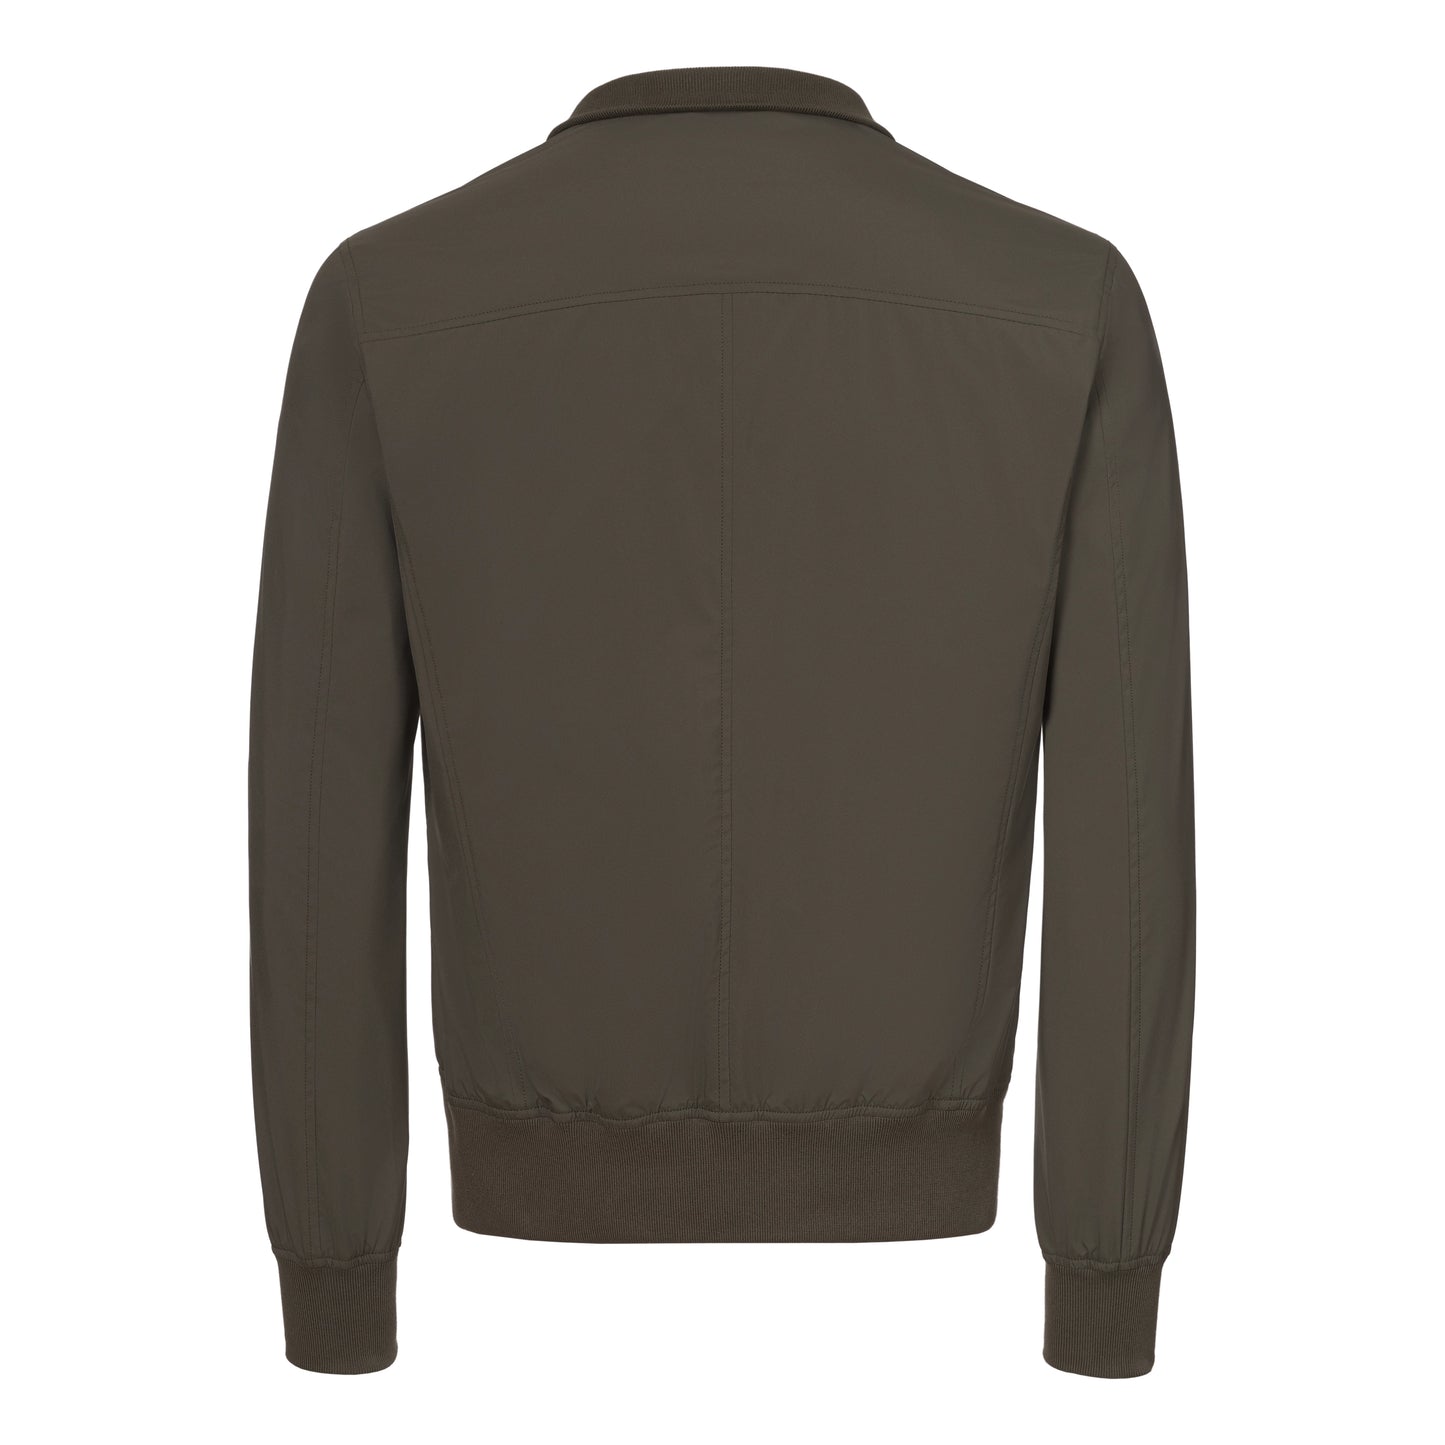 Stand-Up Collar Blouson in Military Green